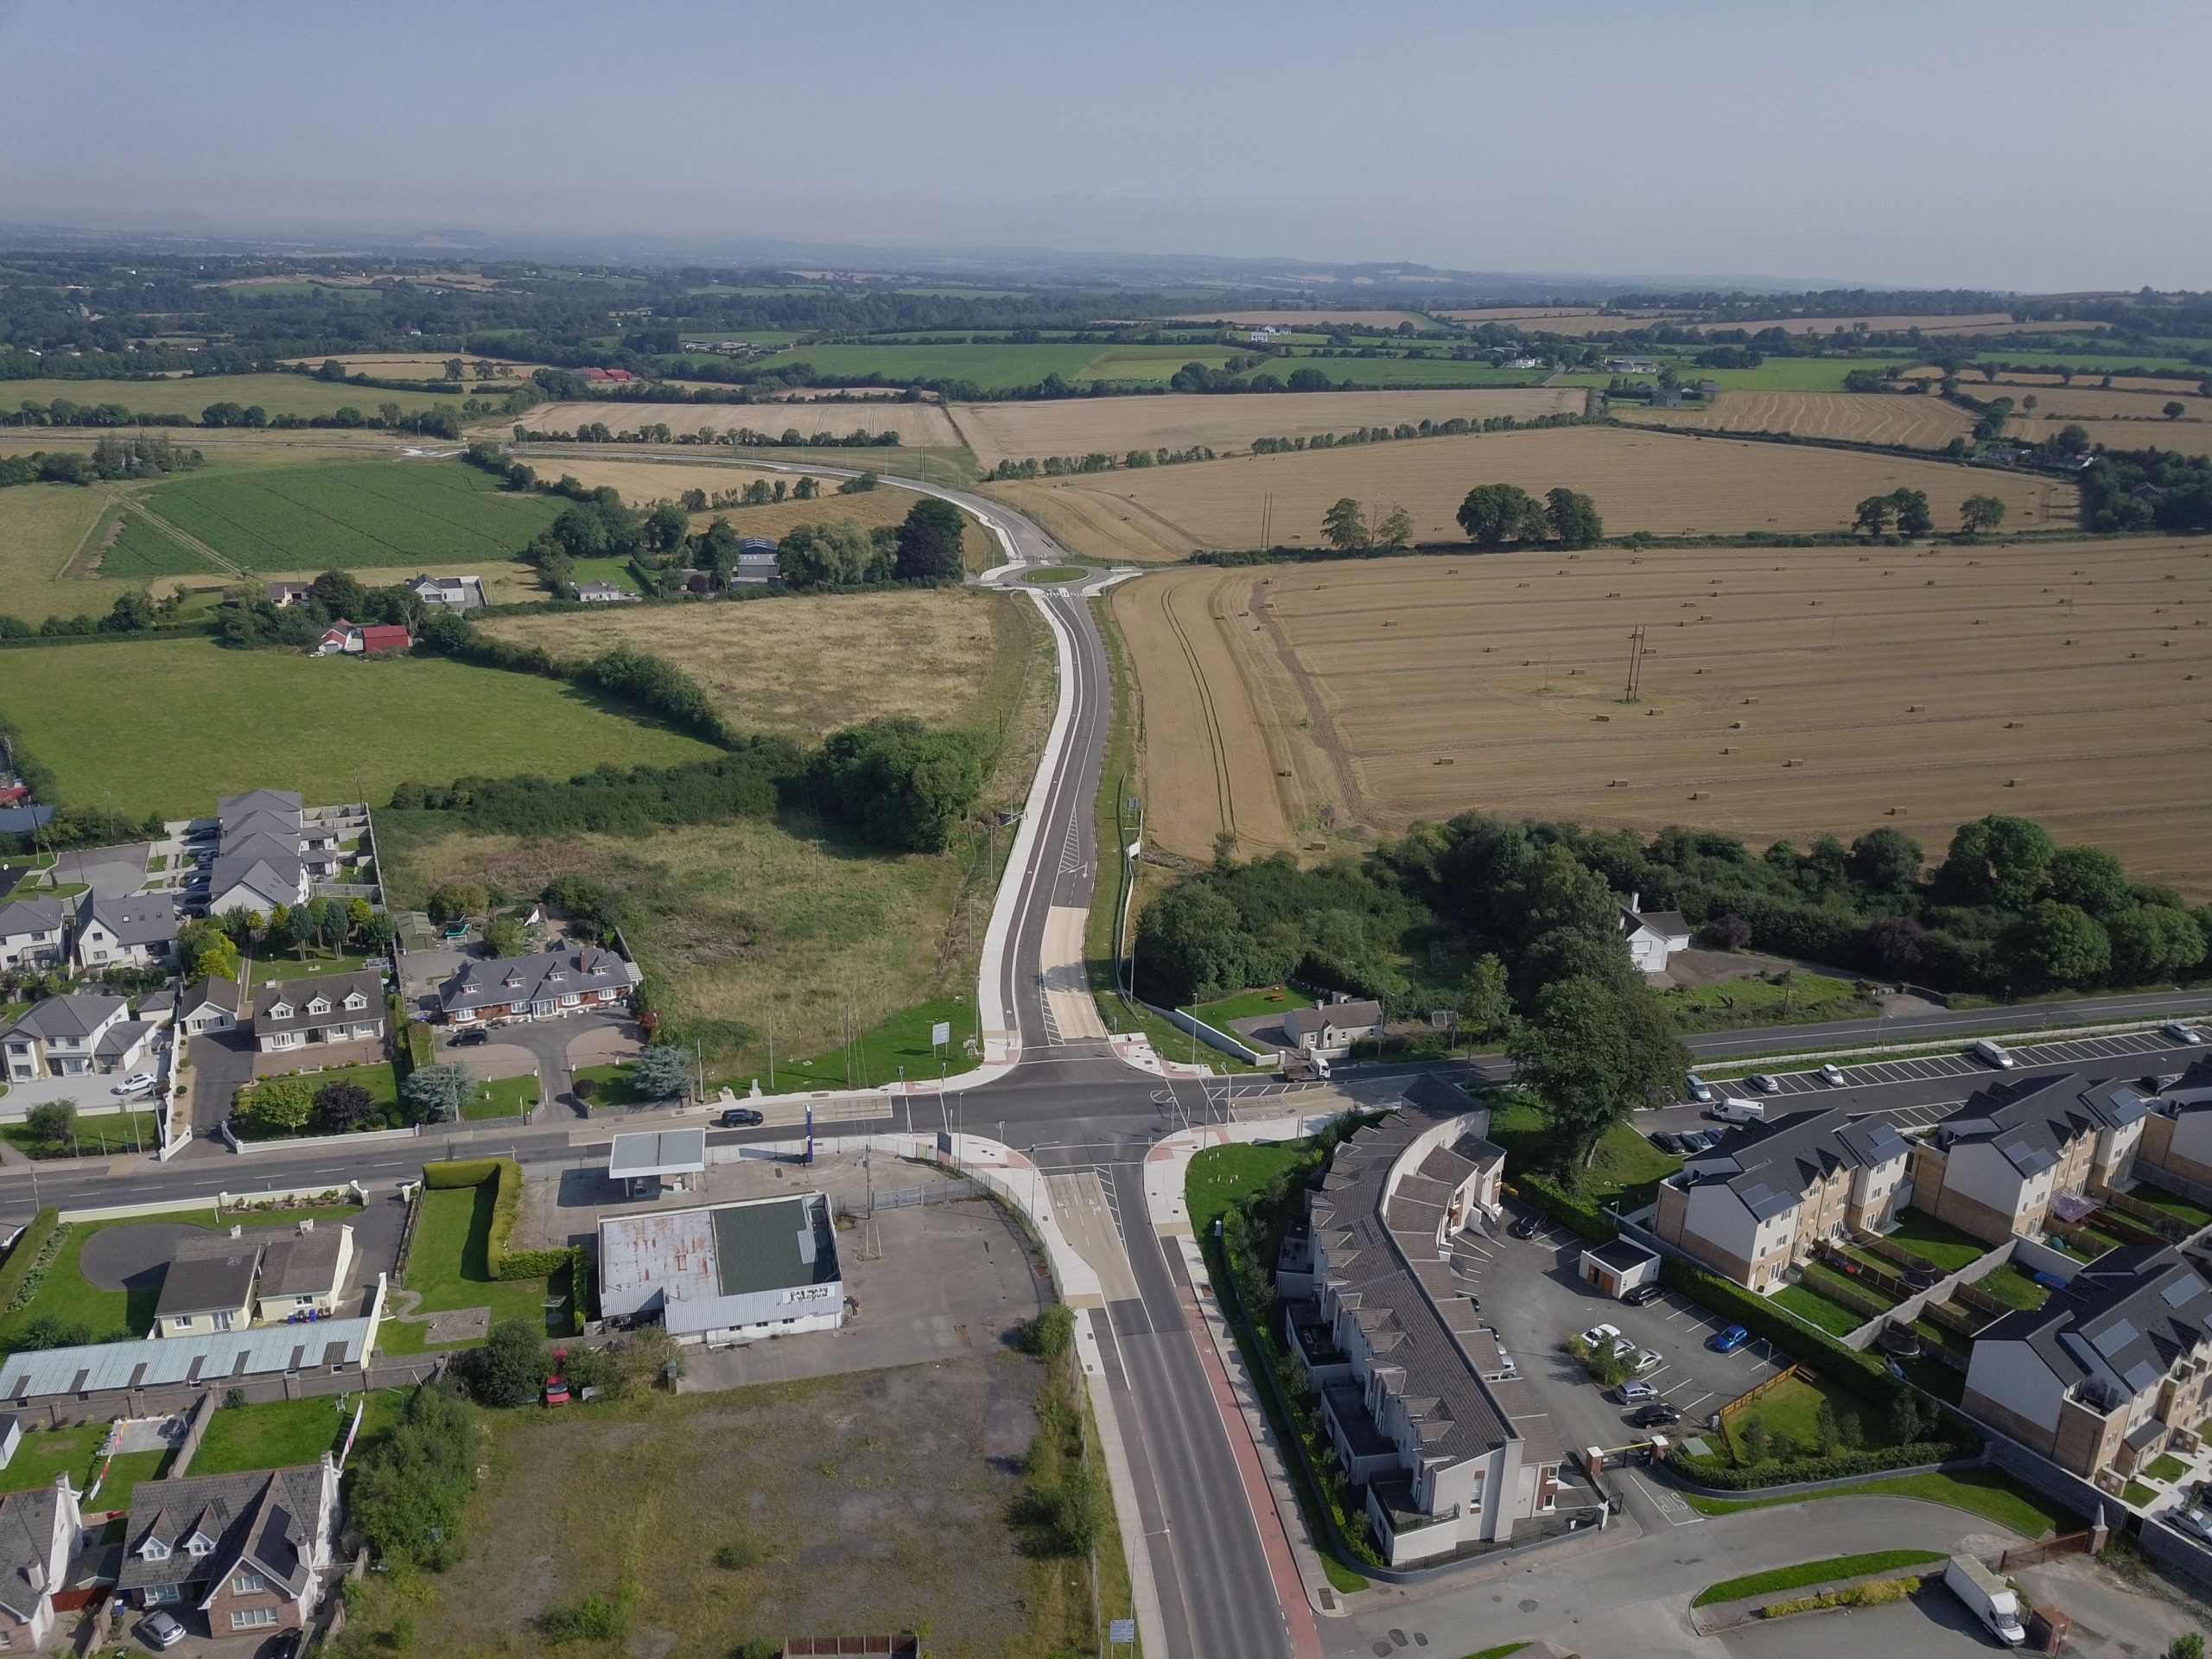 LDR6 Project on behalf of Meath County Council completed